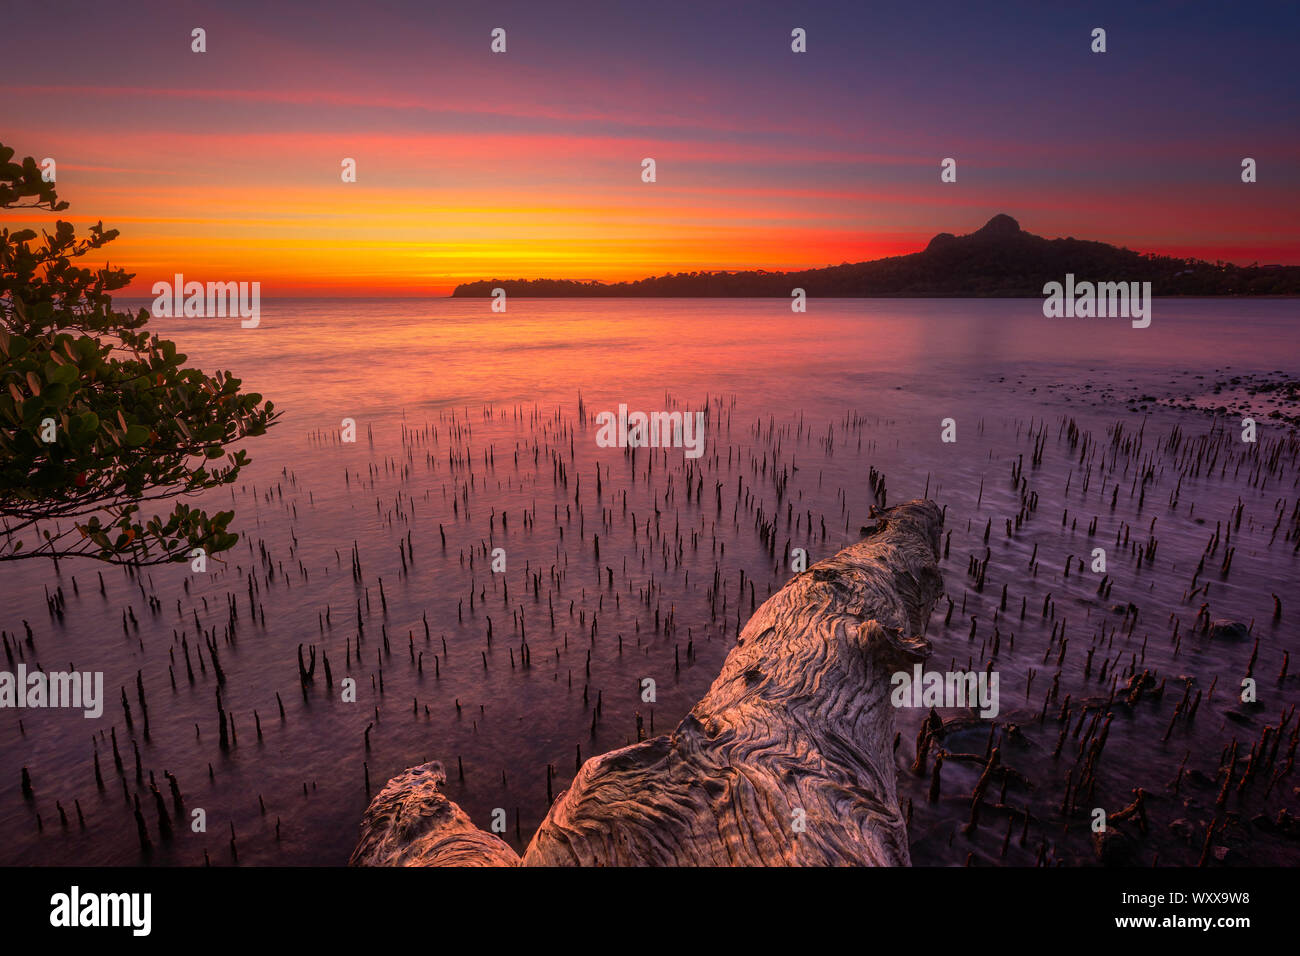 Sunset on a mangrove in the Bay of M'zouazia, Mayotte Stock Photo